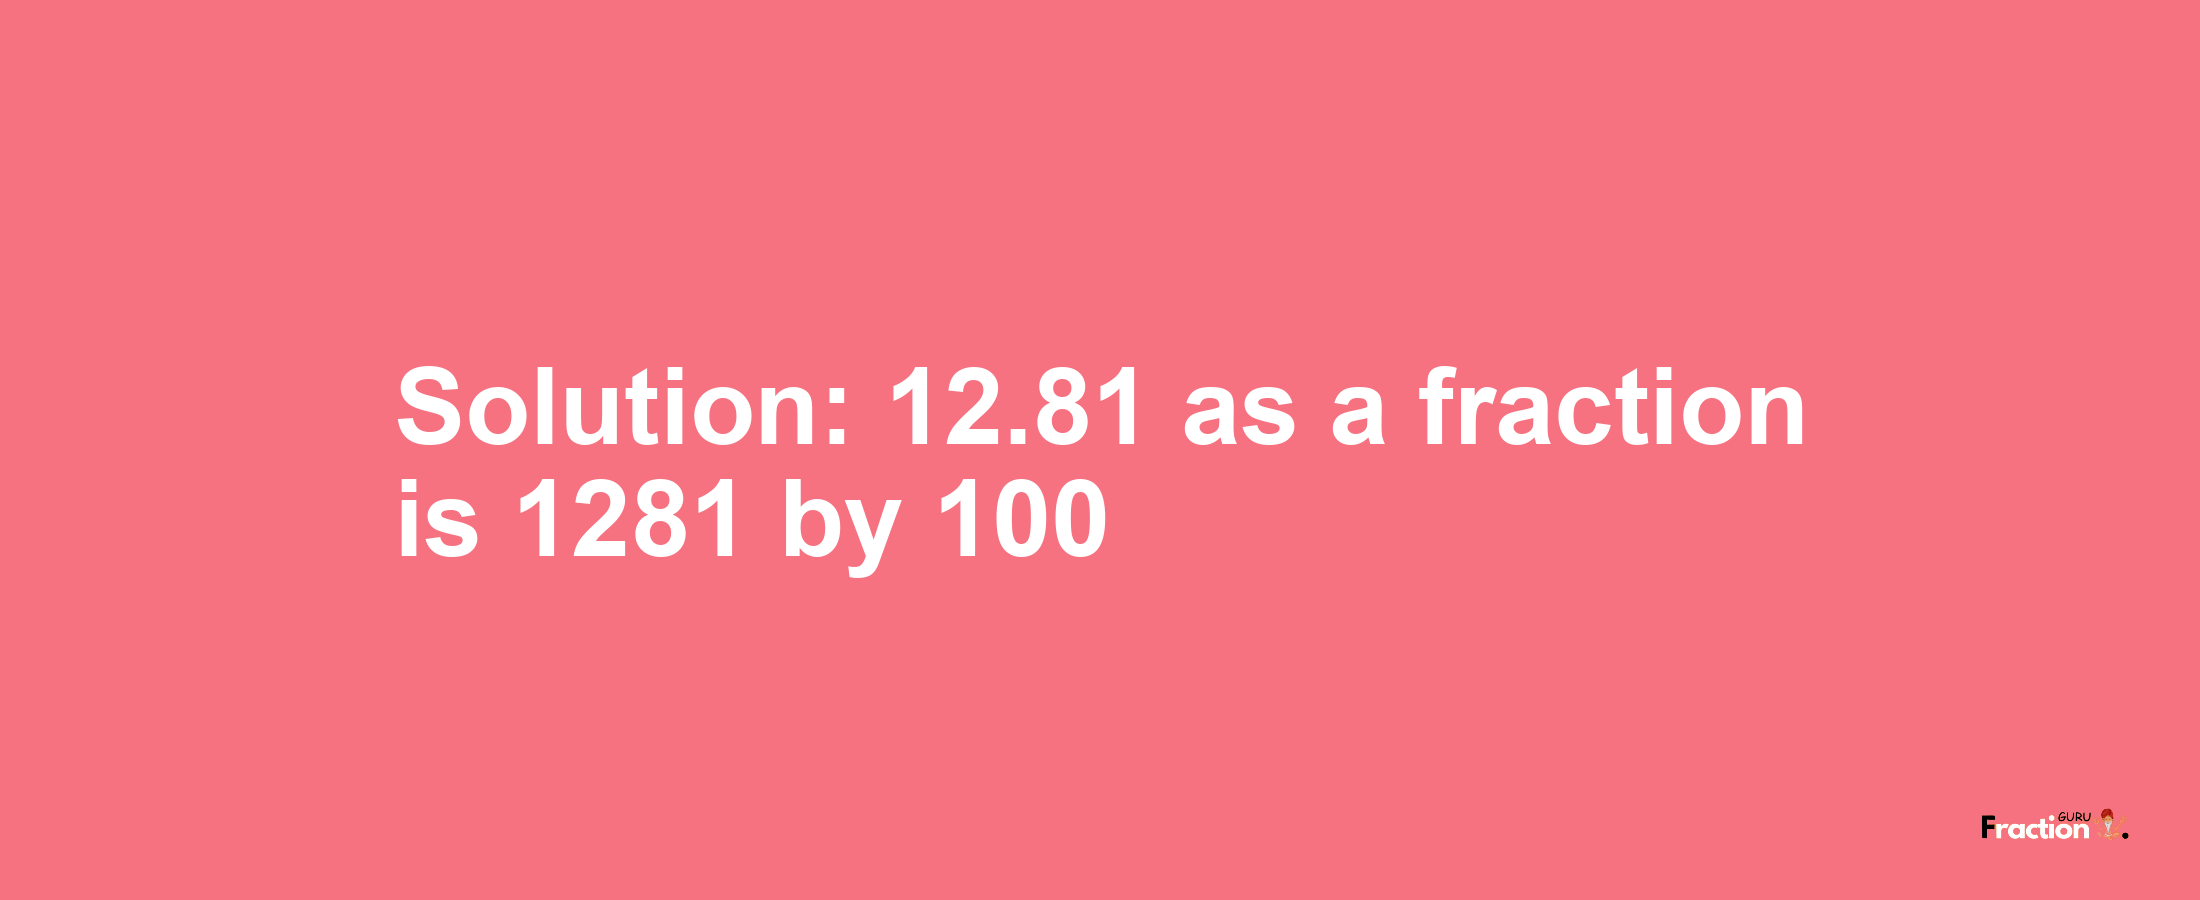 Solution:12.81 as a fraction is 1281/100